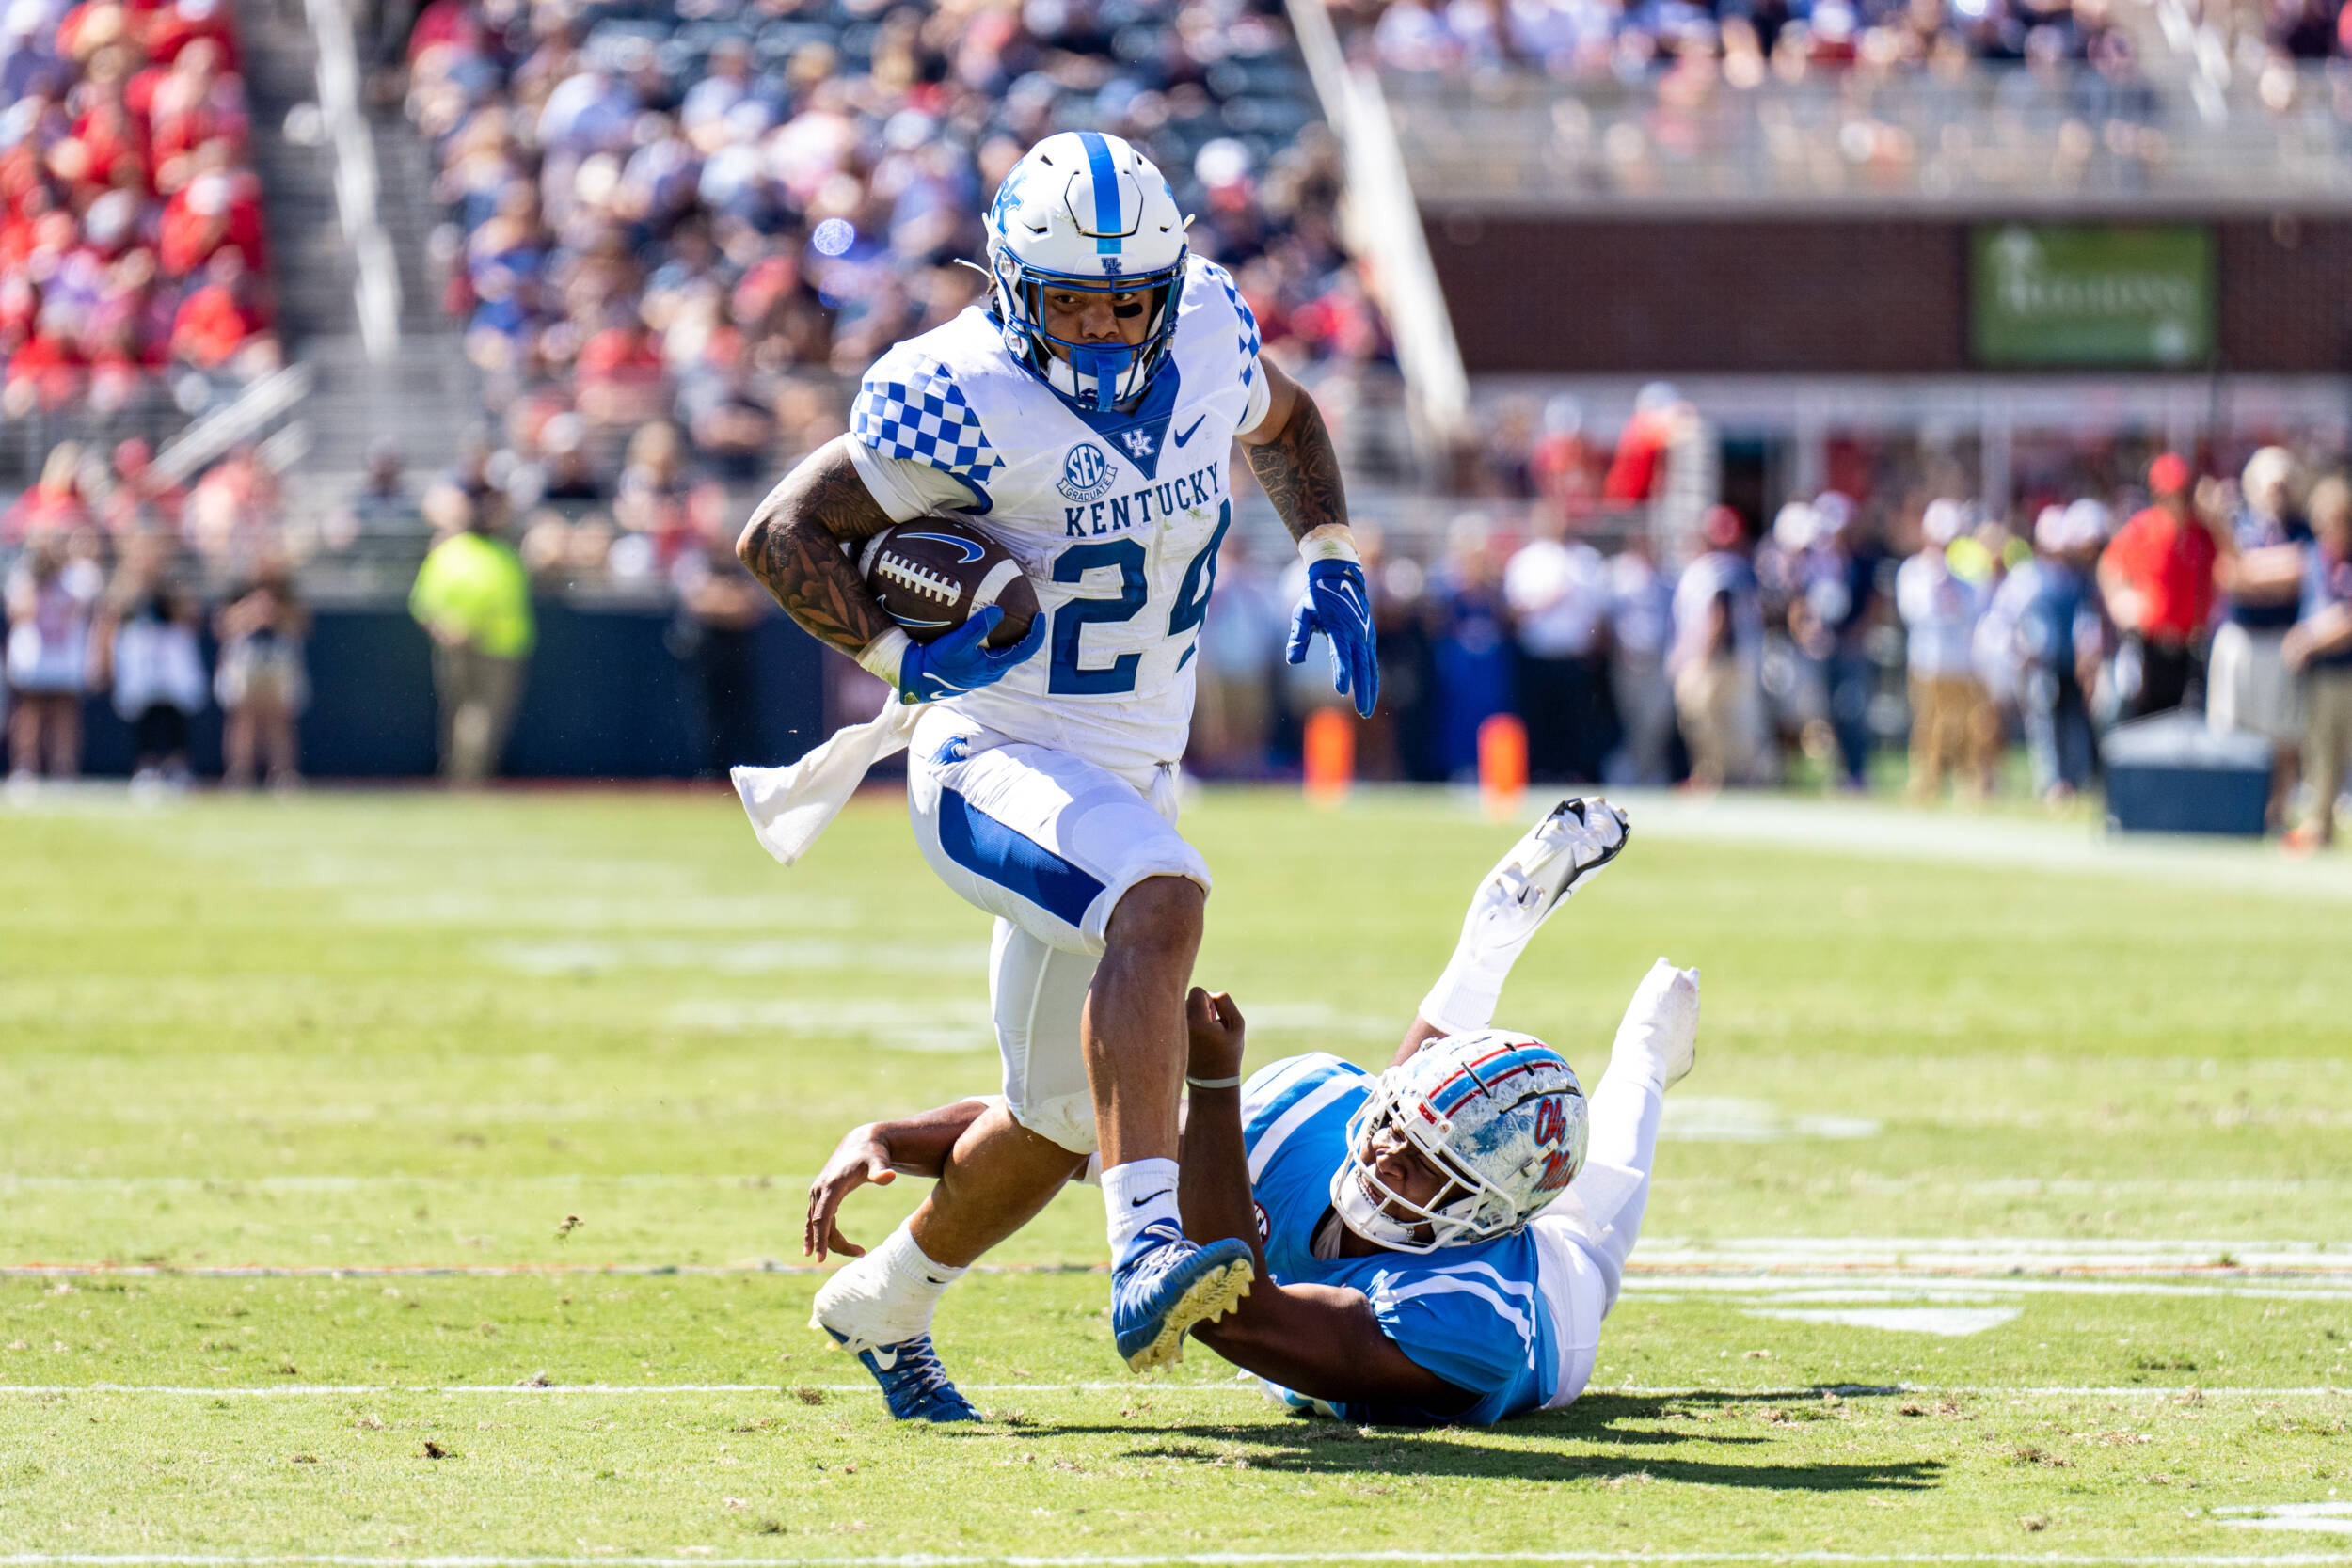 Stoops, Cats Making the Most of Week 'Off'